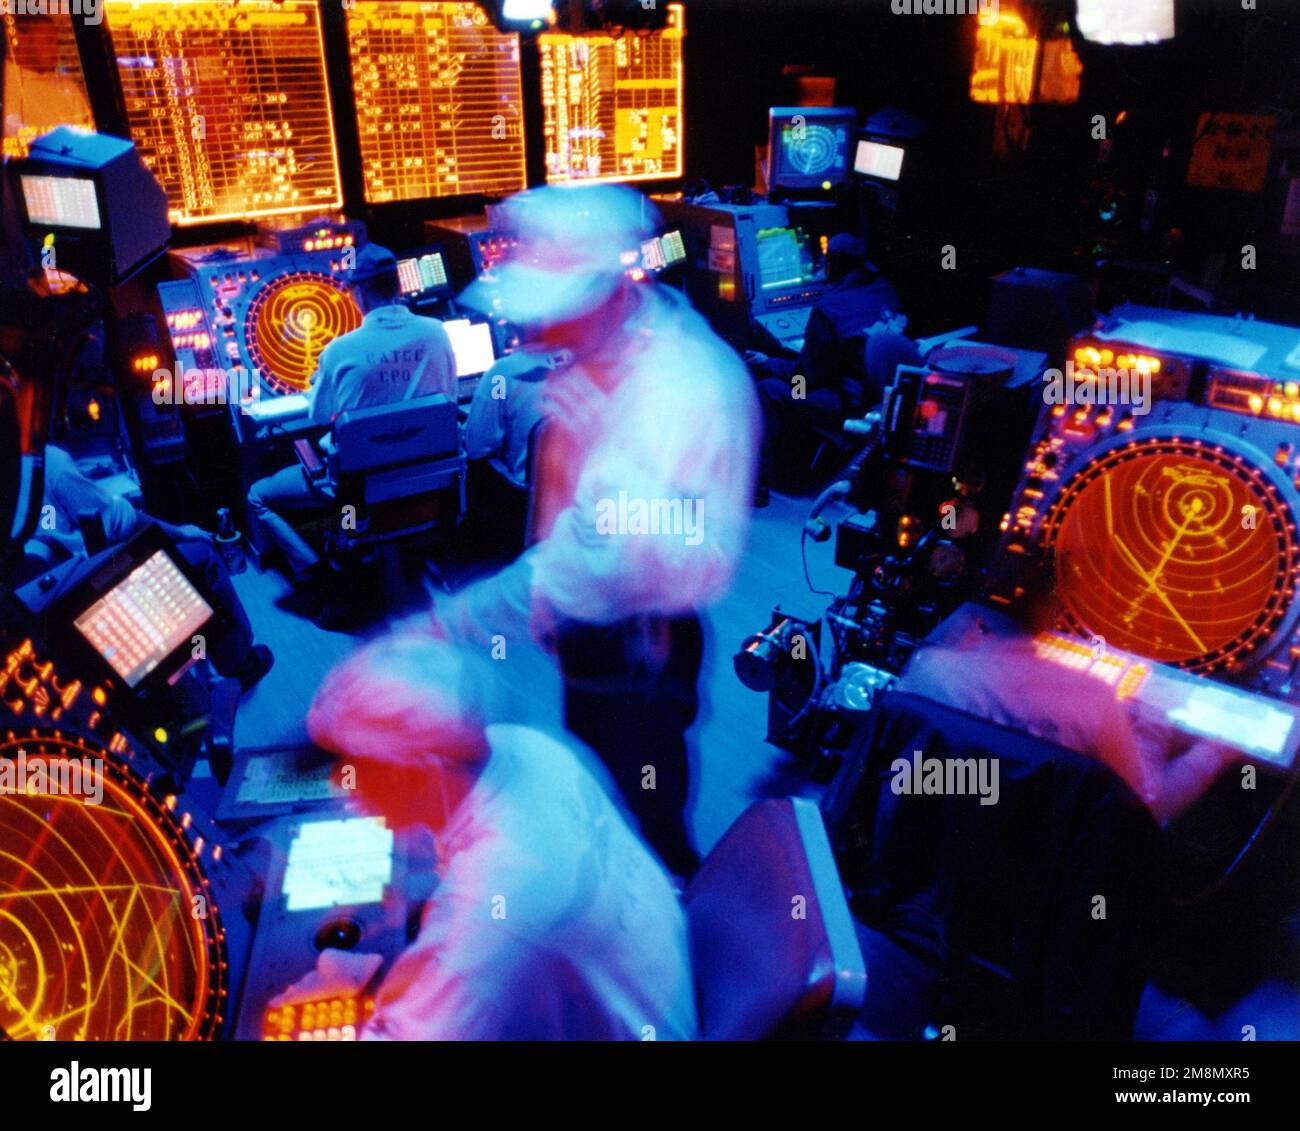 Military Photographer of the Year Winner 1998 Title: Controlling the skies Category: Pictorial Place: Second Place PictorialAir traffic controllers working in the CATCC (Carrier Air Traffic Control Center) assist in guiding aircraft on and off the flightdeck of the USS Enterprise (CVN 65). Country: Unknown Stock Photo